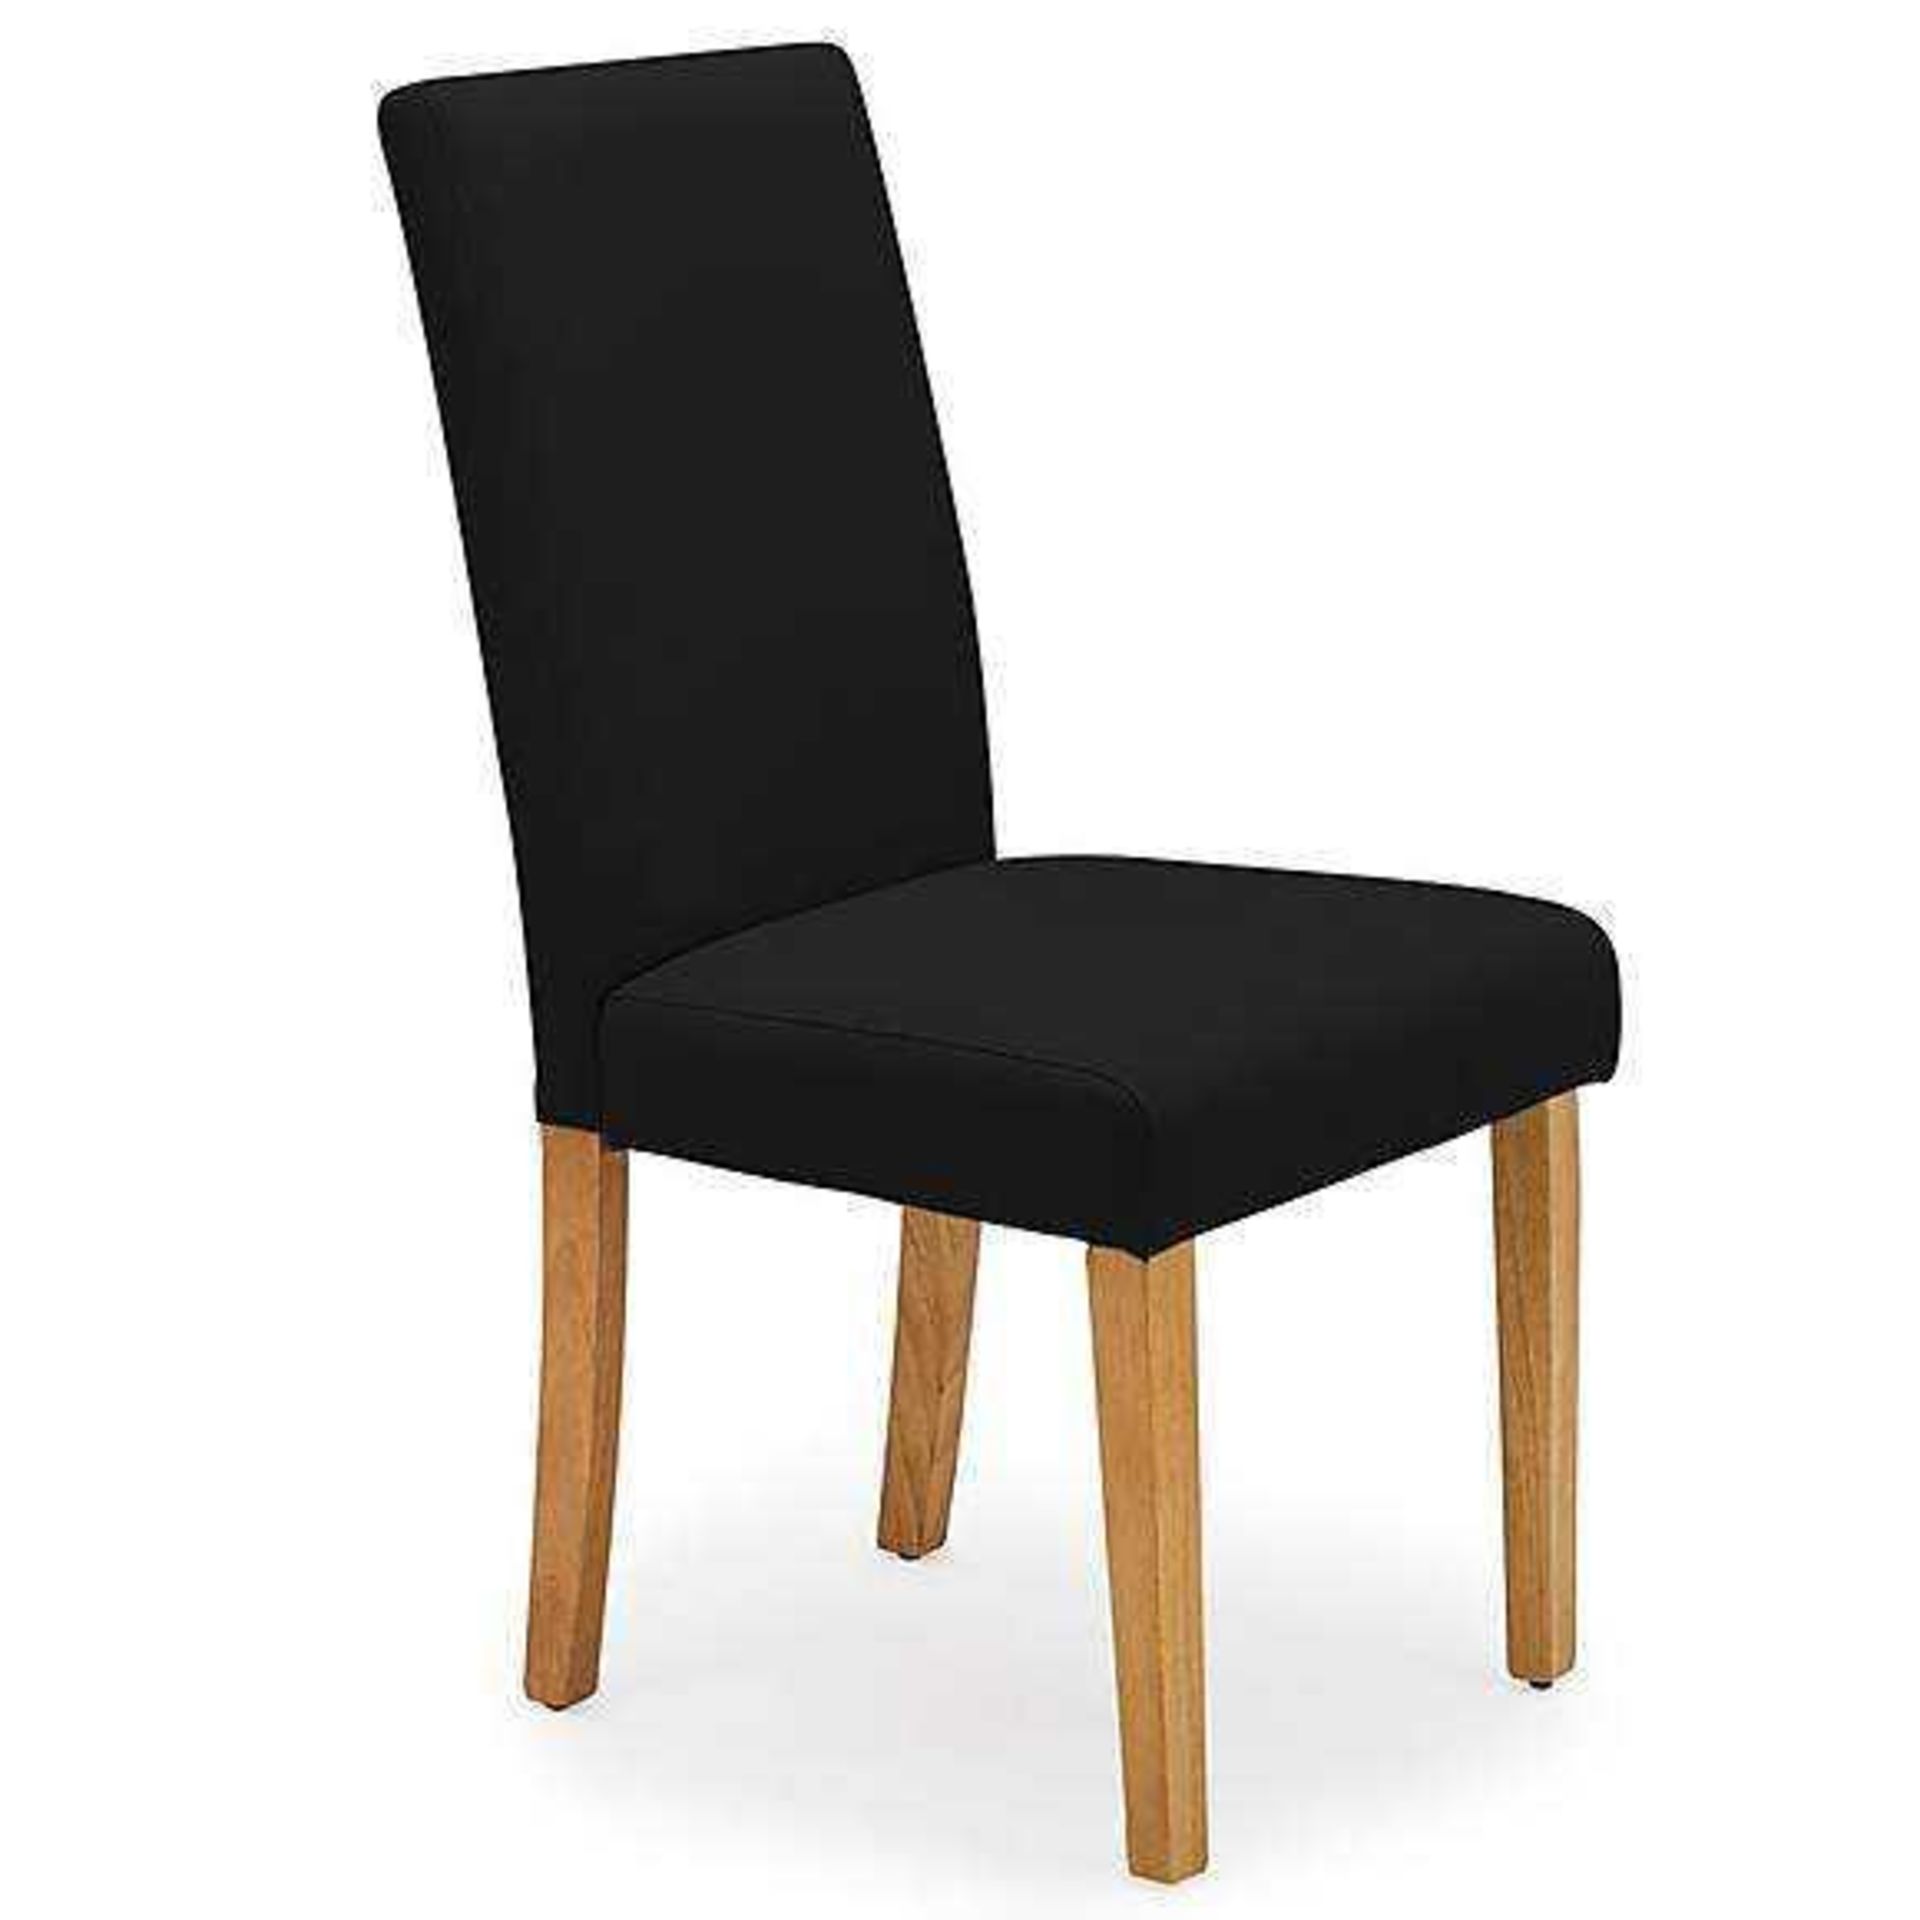 Boxed home leather dining chairs in black